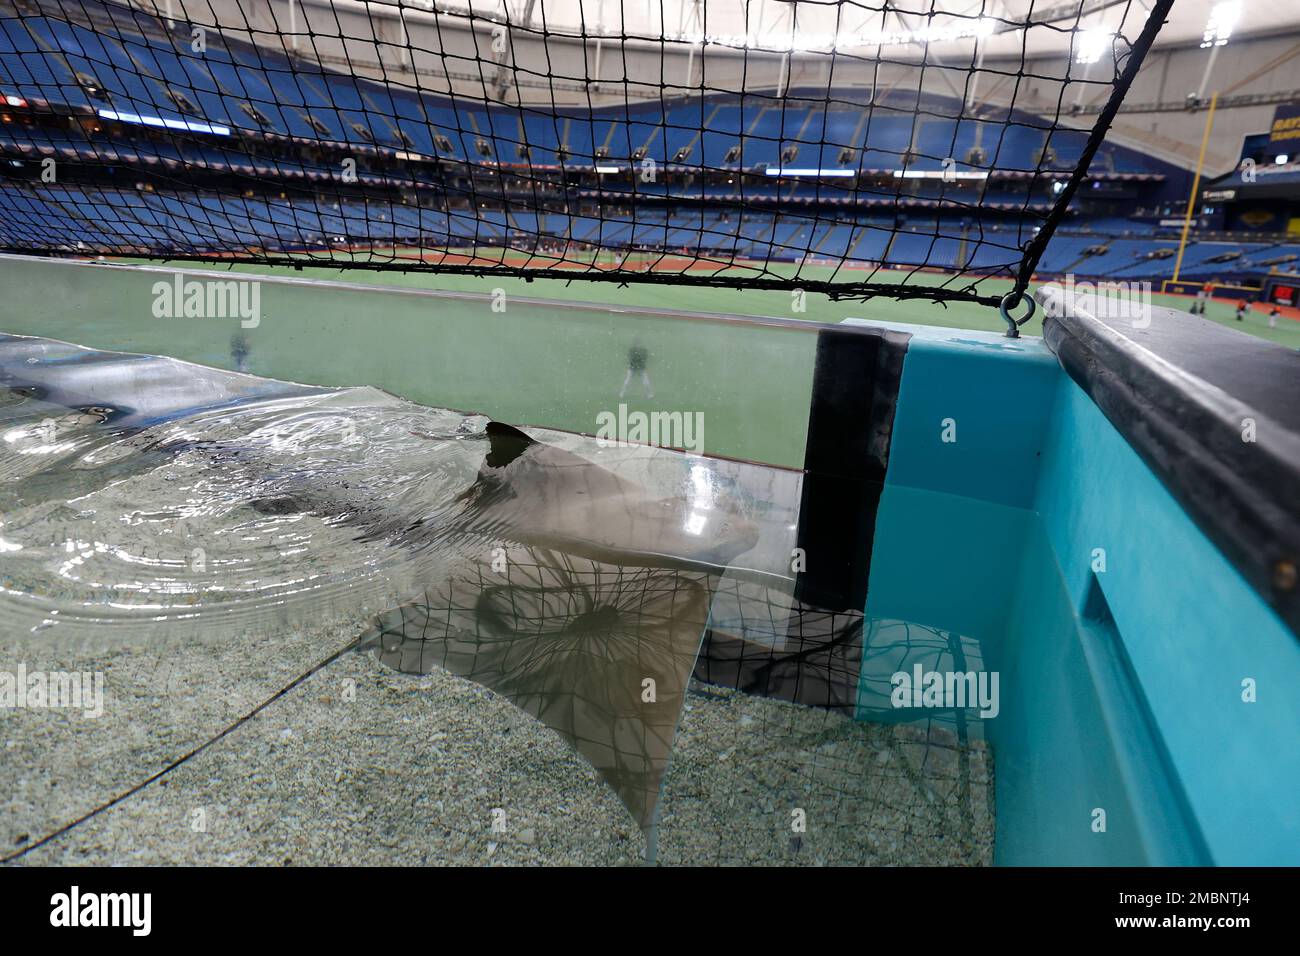 A cow nose stingray swims in tank over the outfield of Tropicana